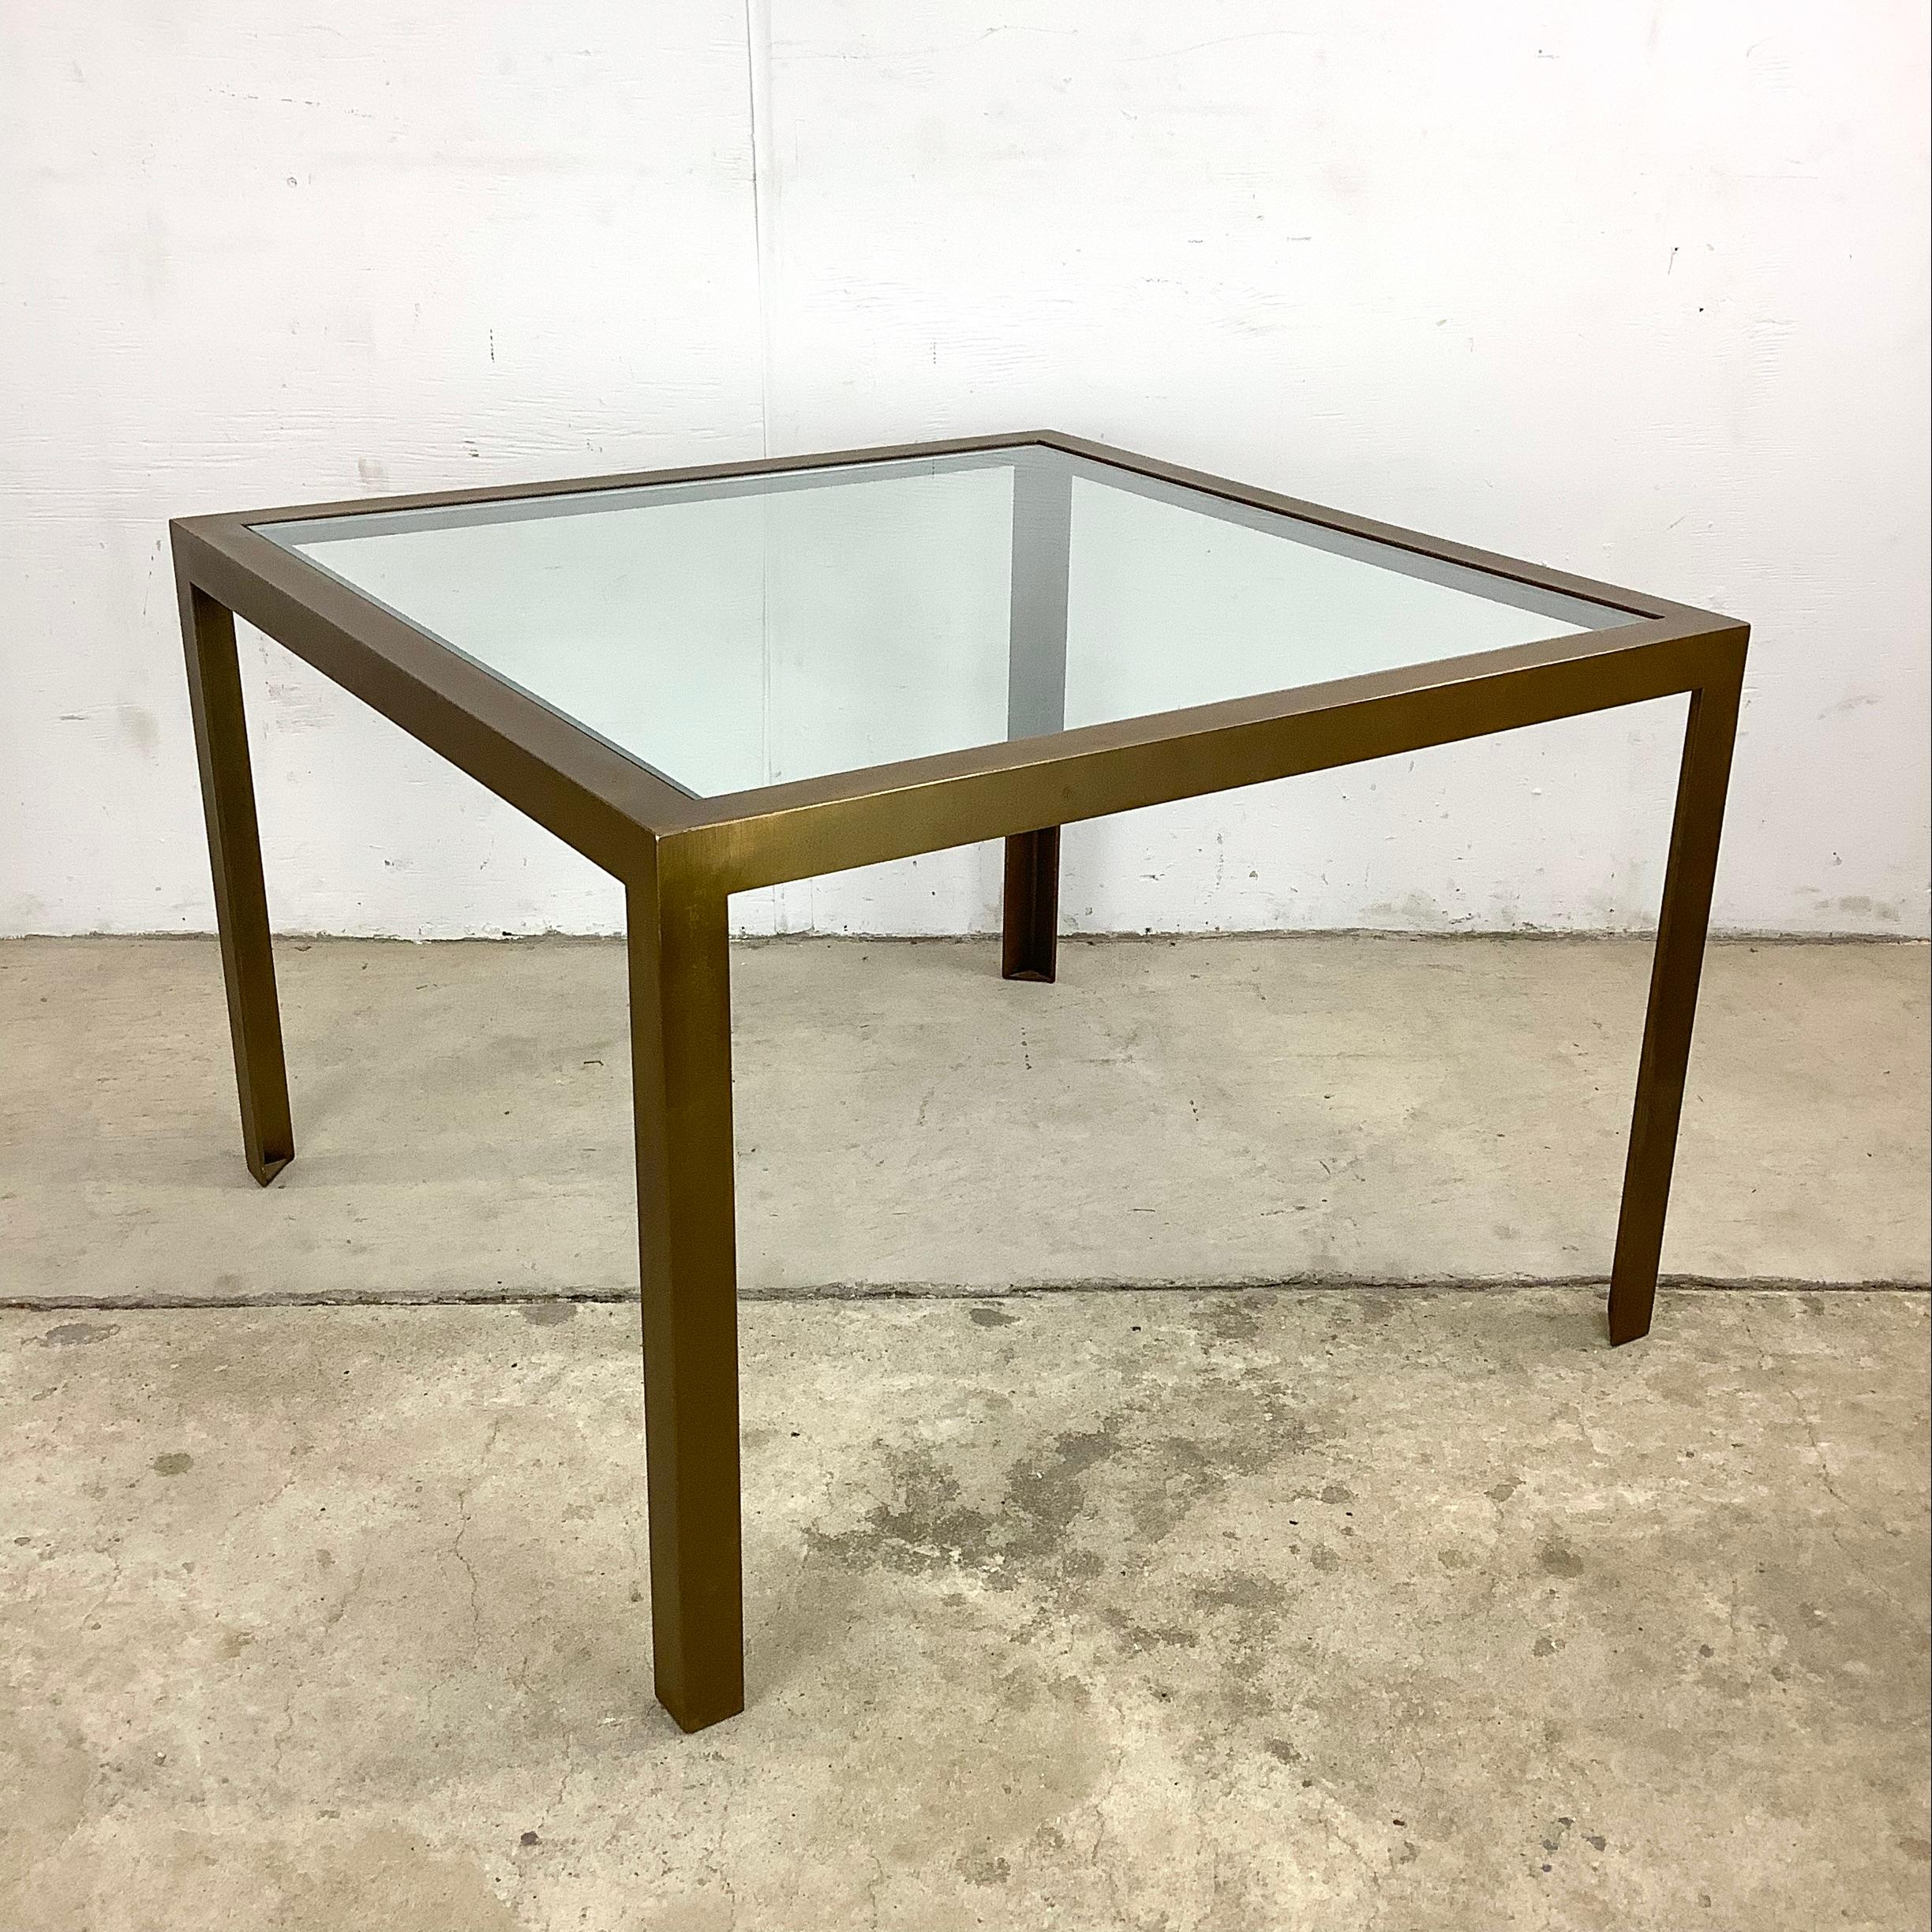 Tall Vintage Modern Coffee Table In Good Condition For Sale In Trenton, NJ